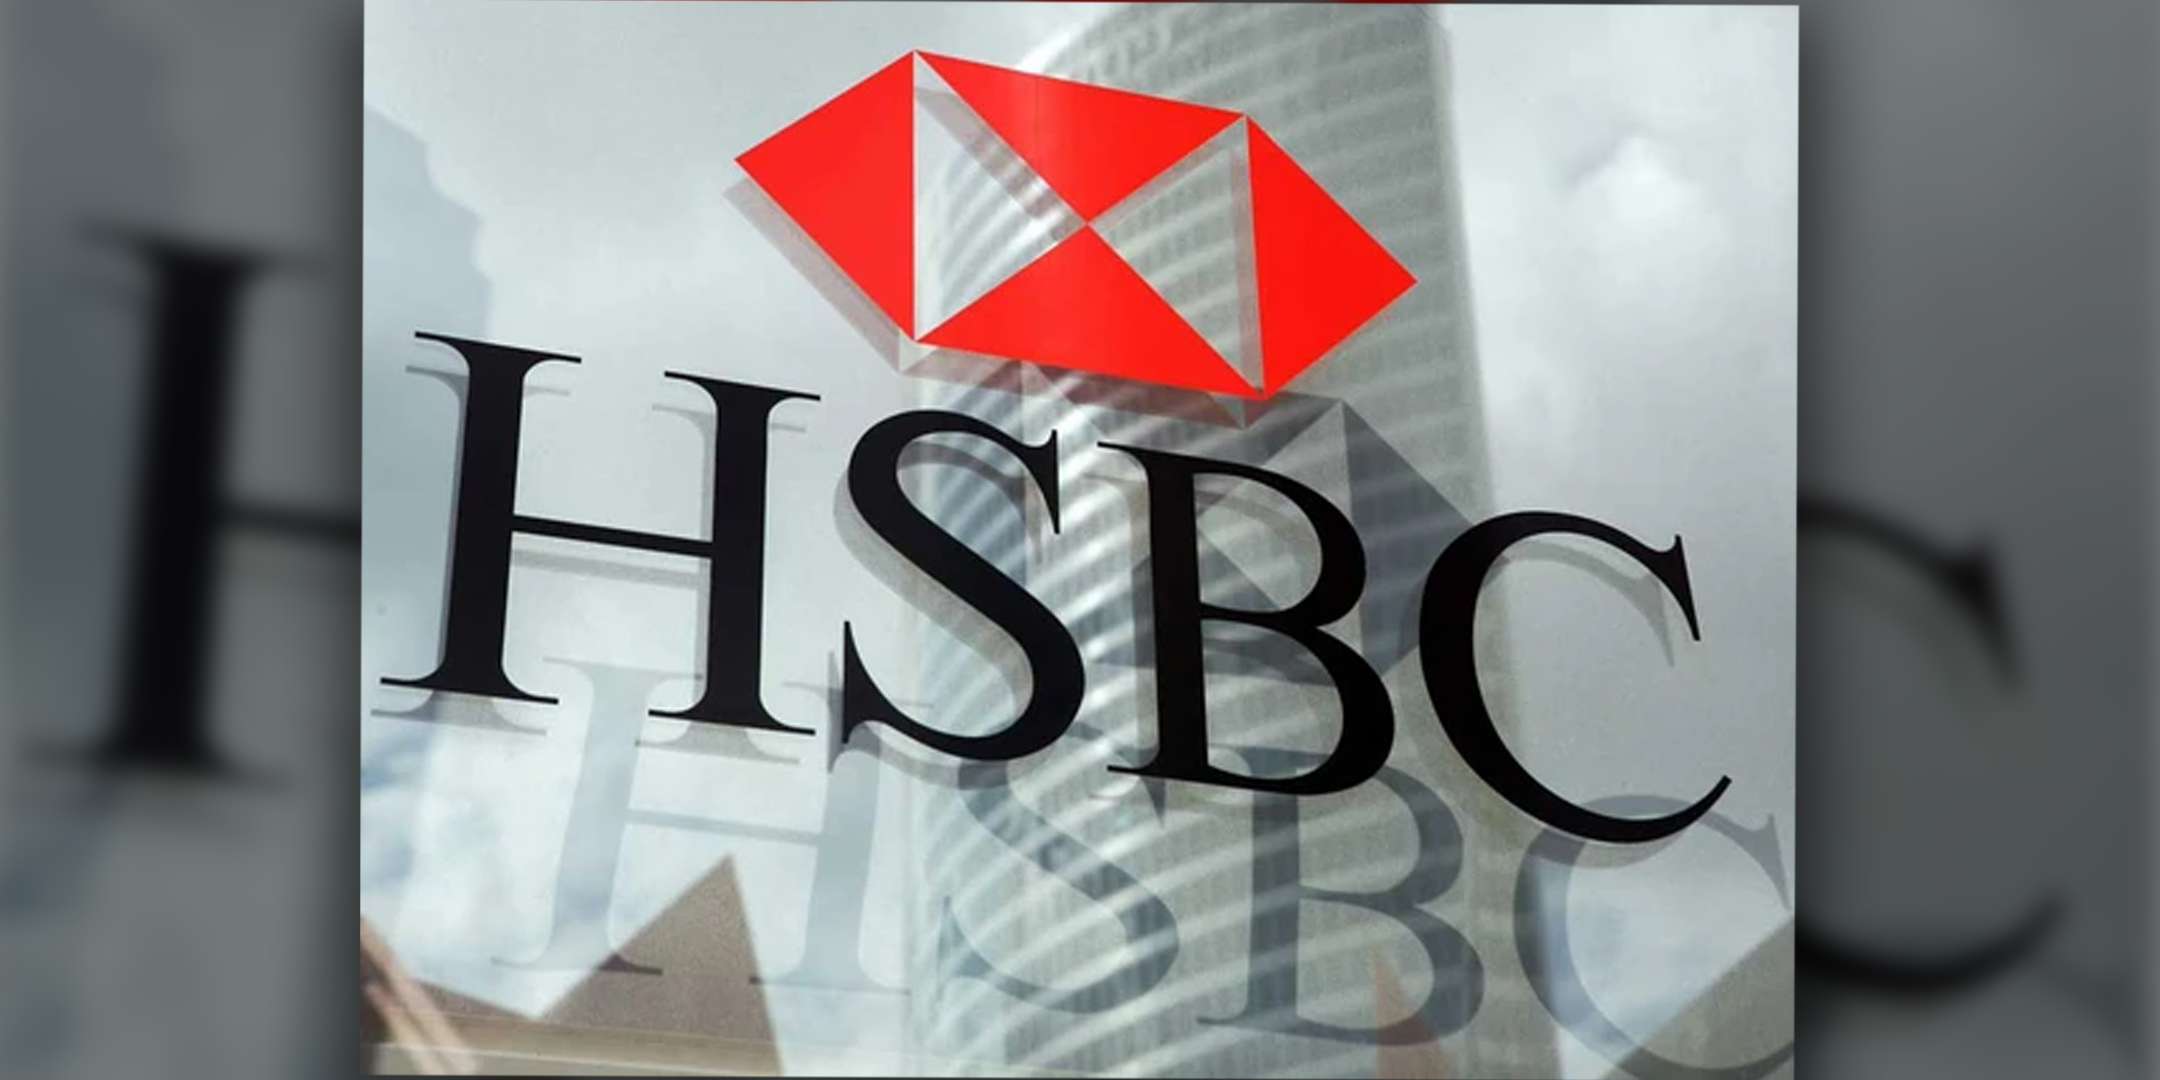 Hsbc Offers Mortgage Rate Below One Per Cent Financial Post Mr Hamilton 4388